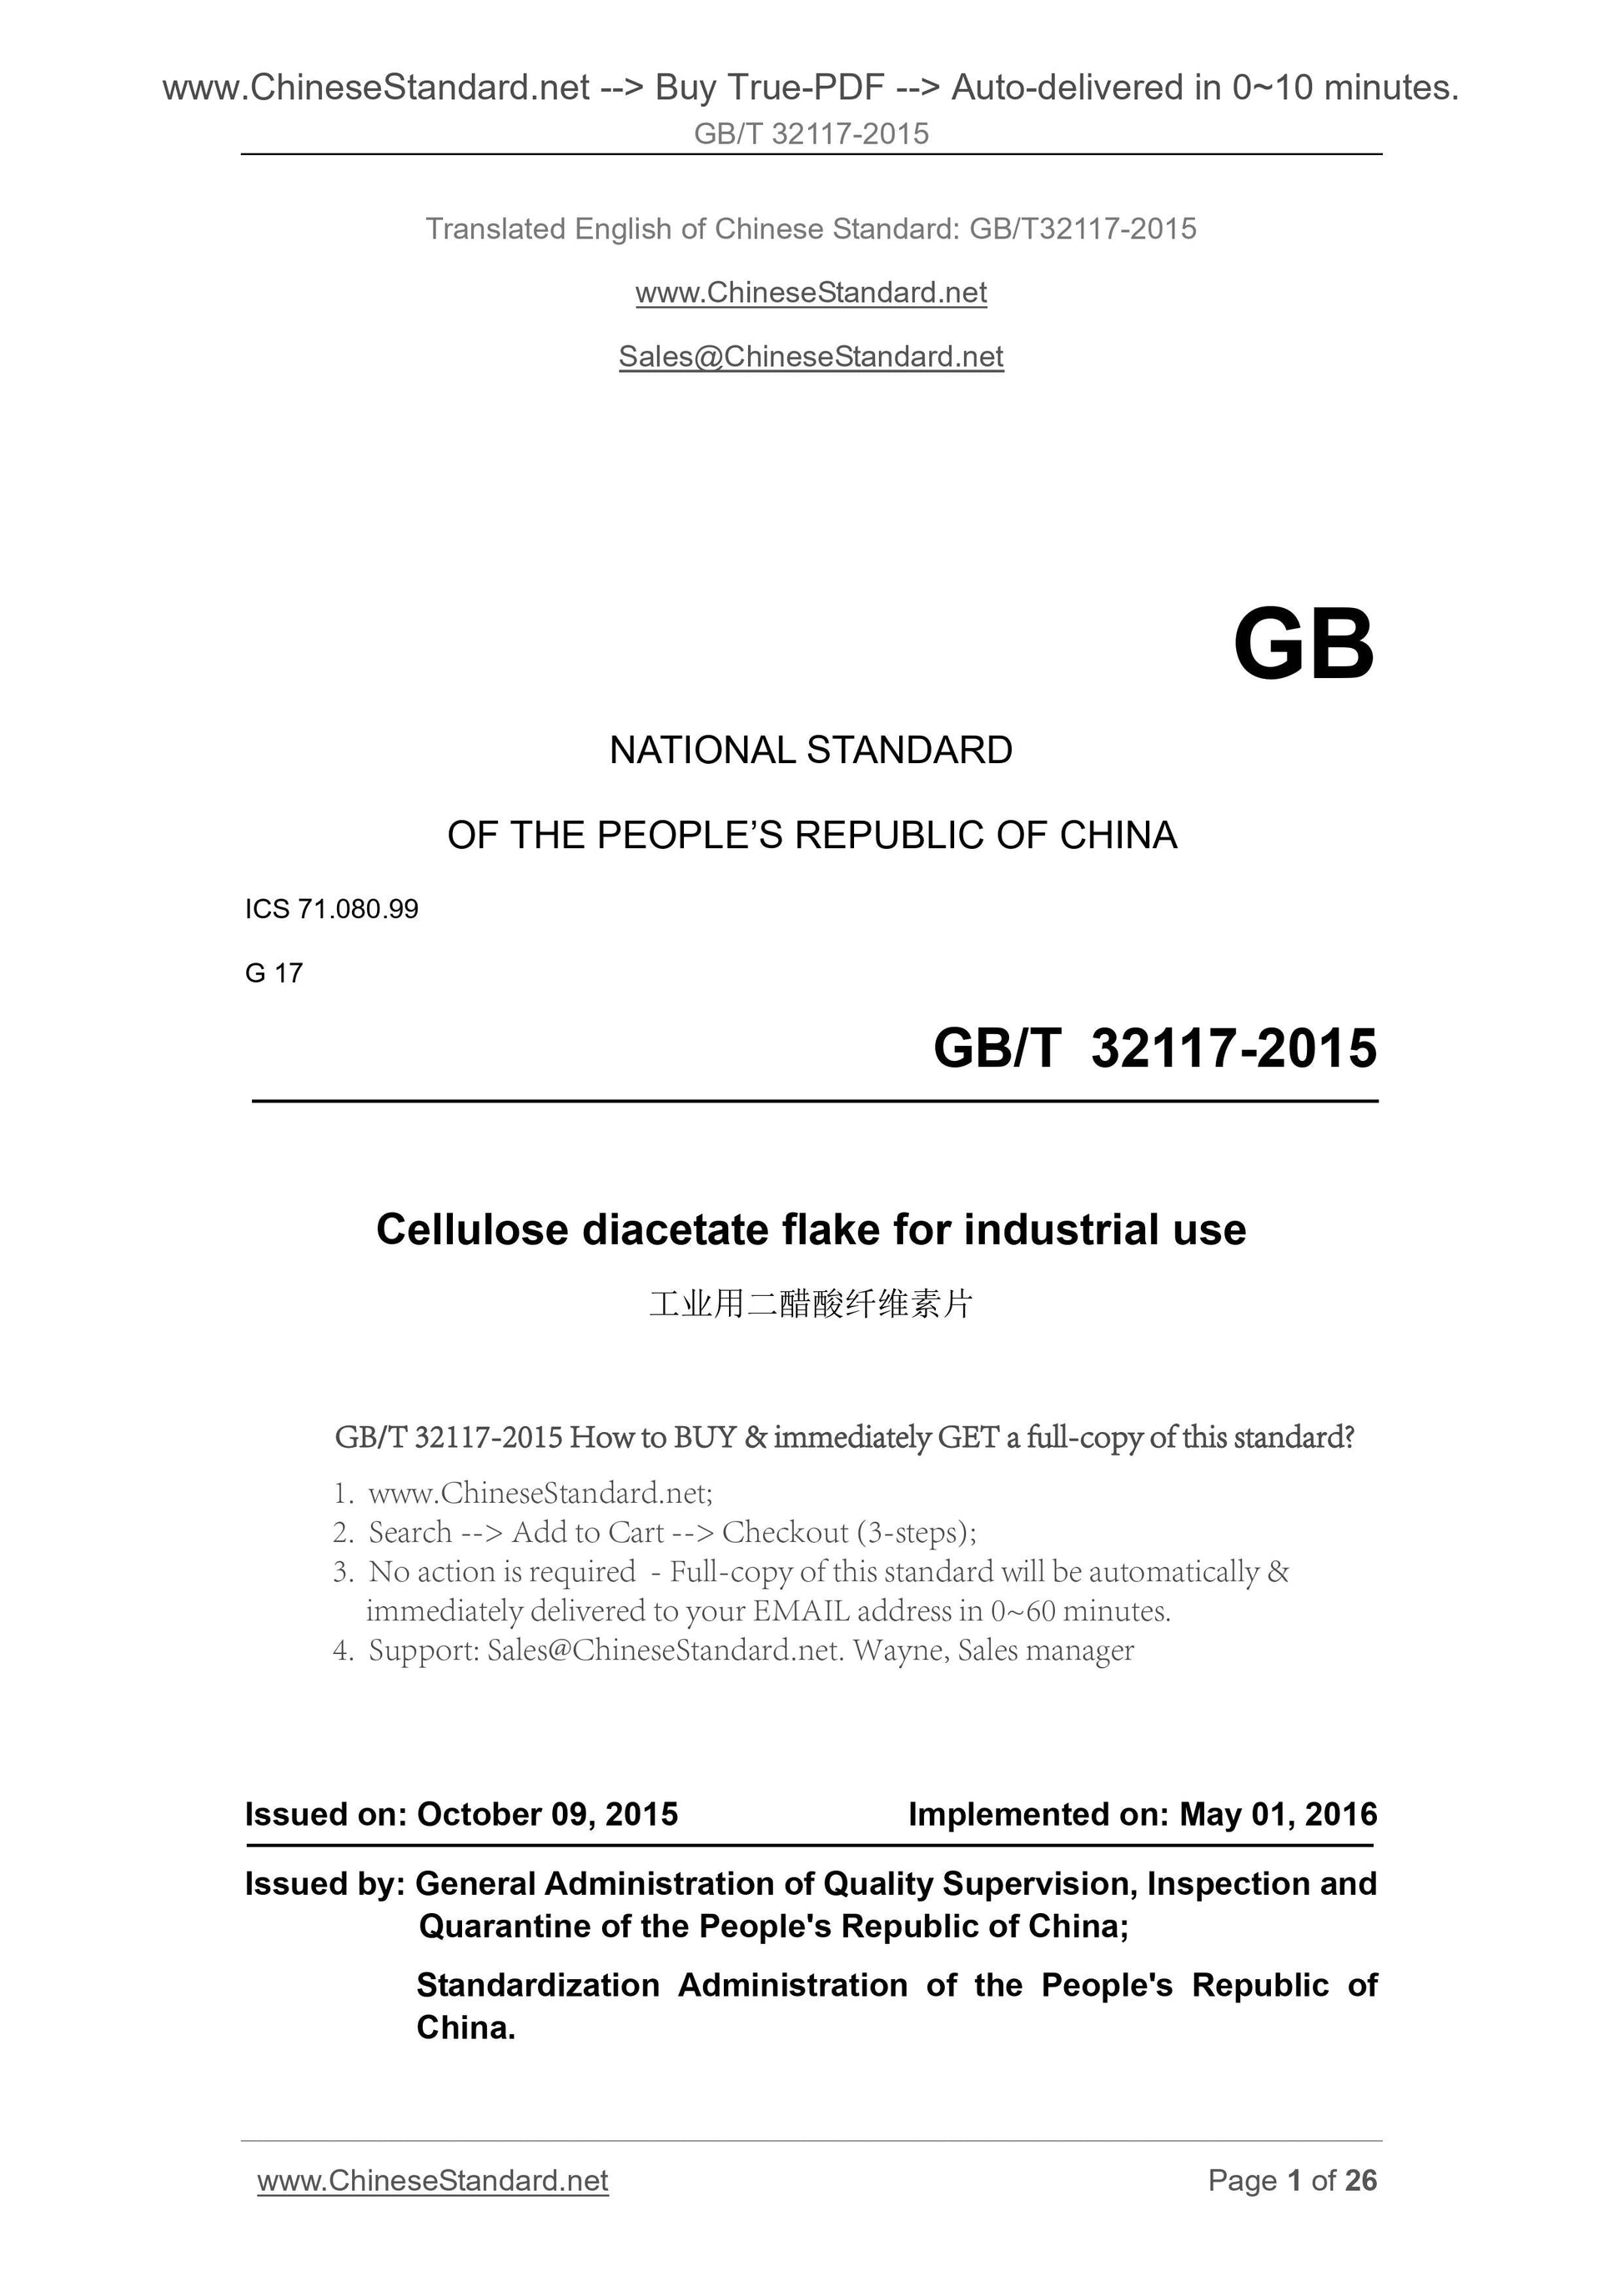 GB/T 32117-2015 Page 1